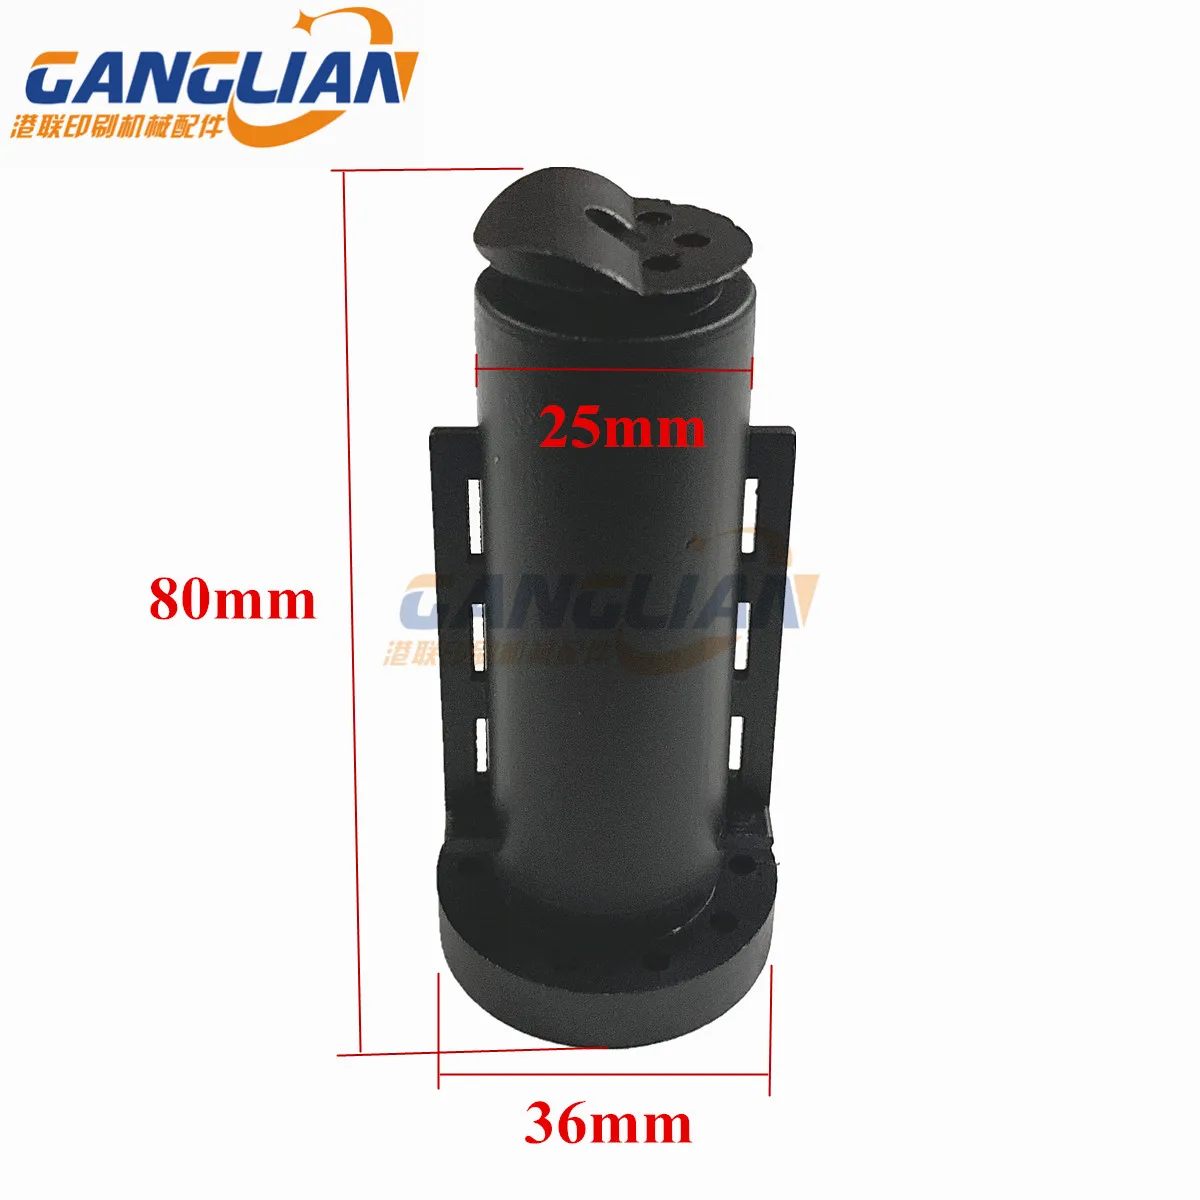 

2 Pieces M3.028.245 for CD74 XL75 Machine Lifting Sucker Offset Machinery Spare Parts Suction Head With Accessories